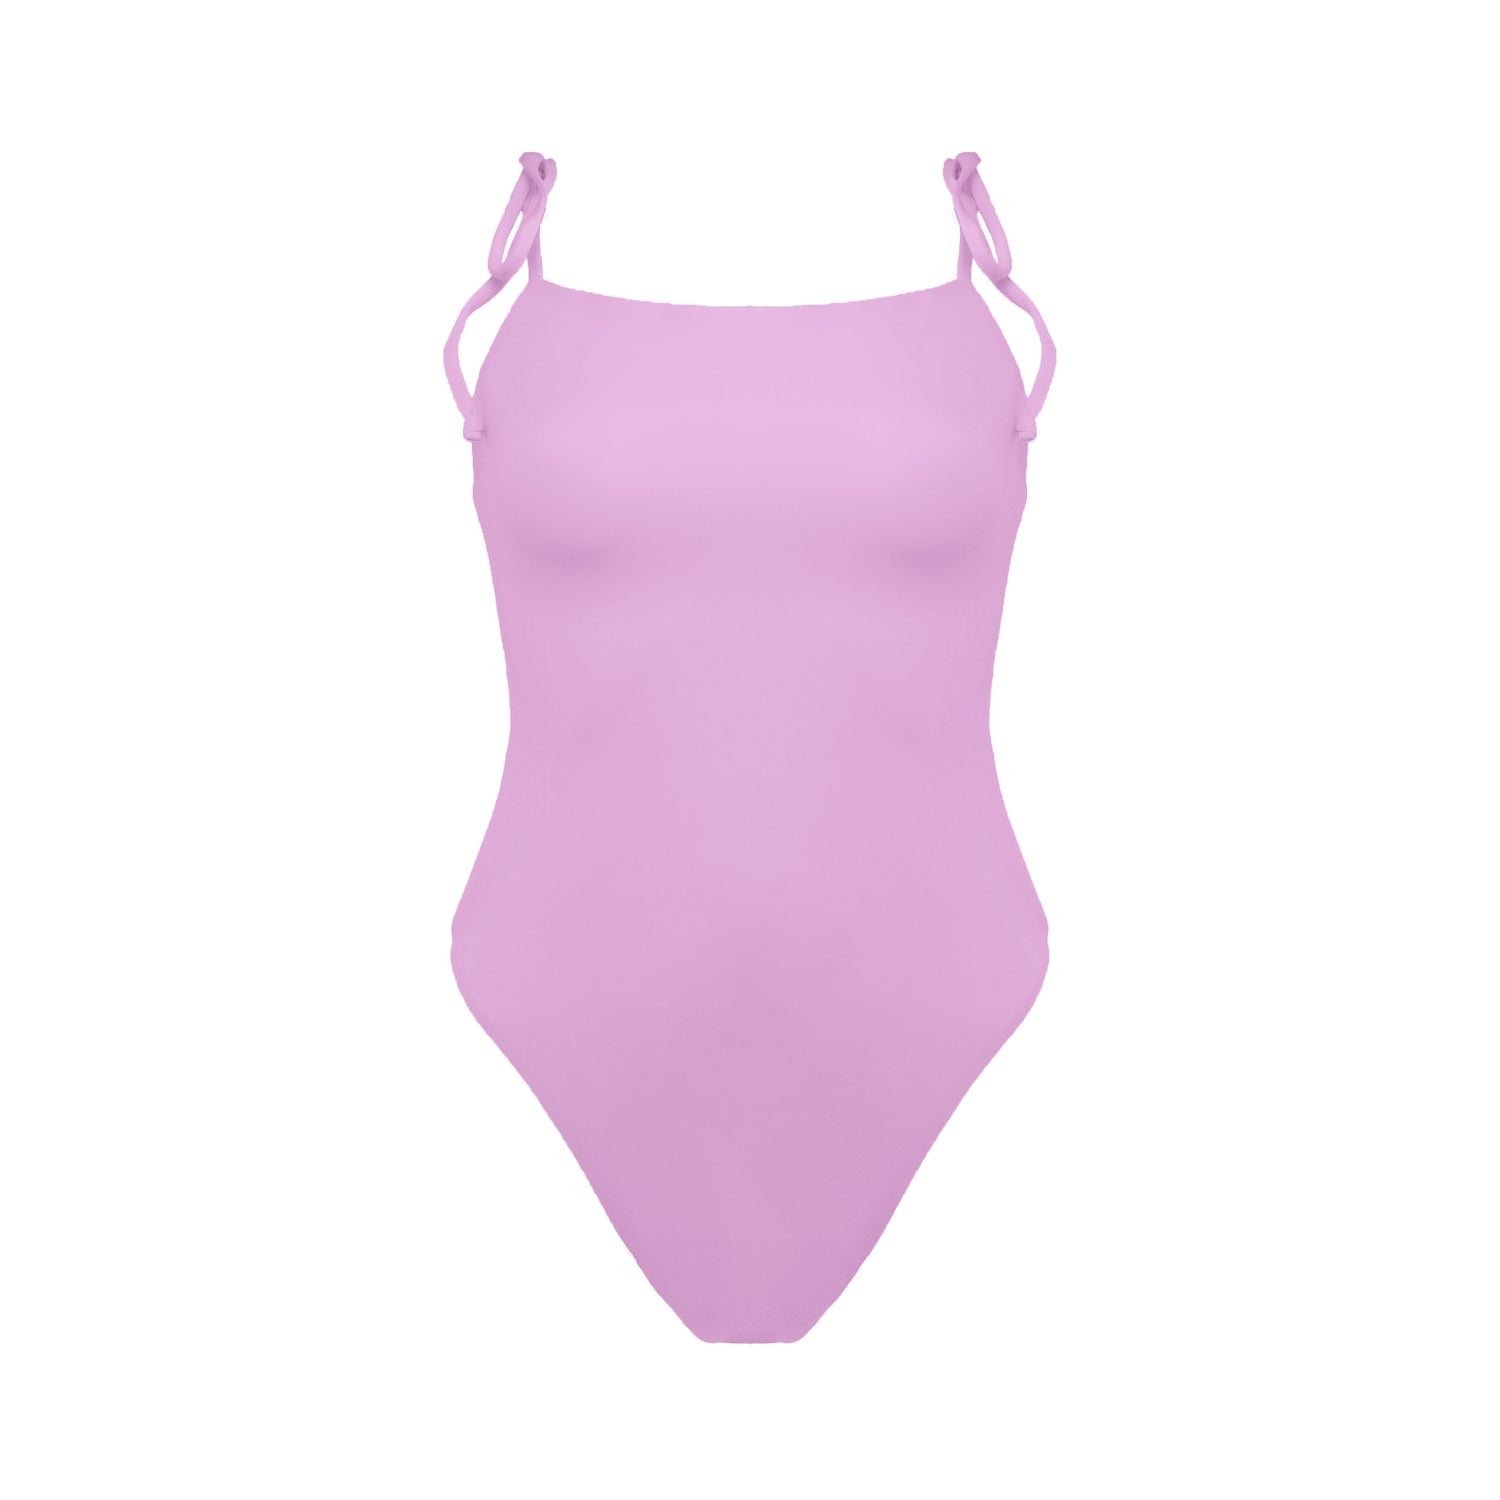 Pastel pink straight neck Tuscany one piece swimsuit with adjustable tie shoulder straps and full bum coverage